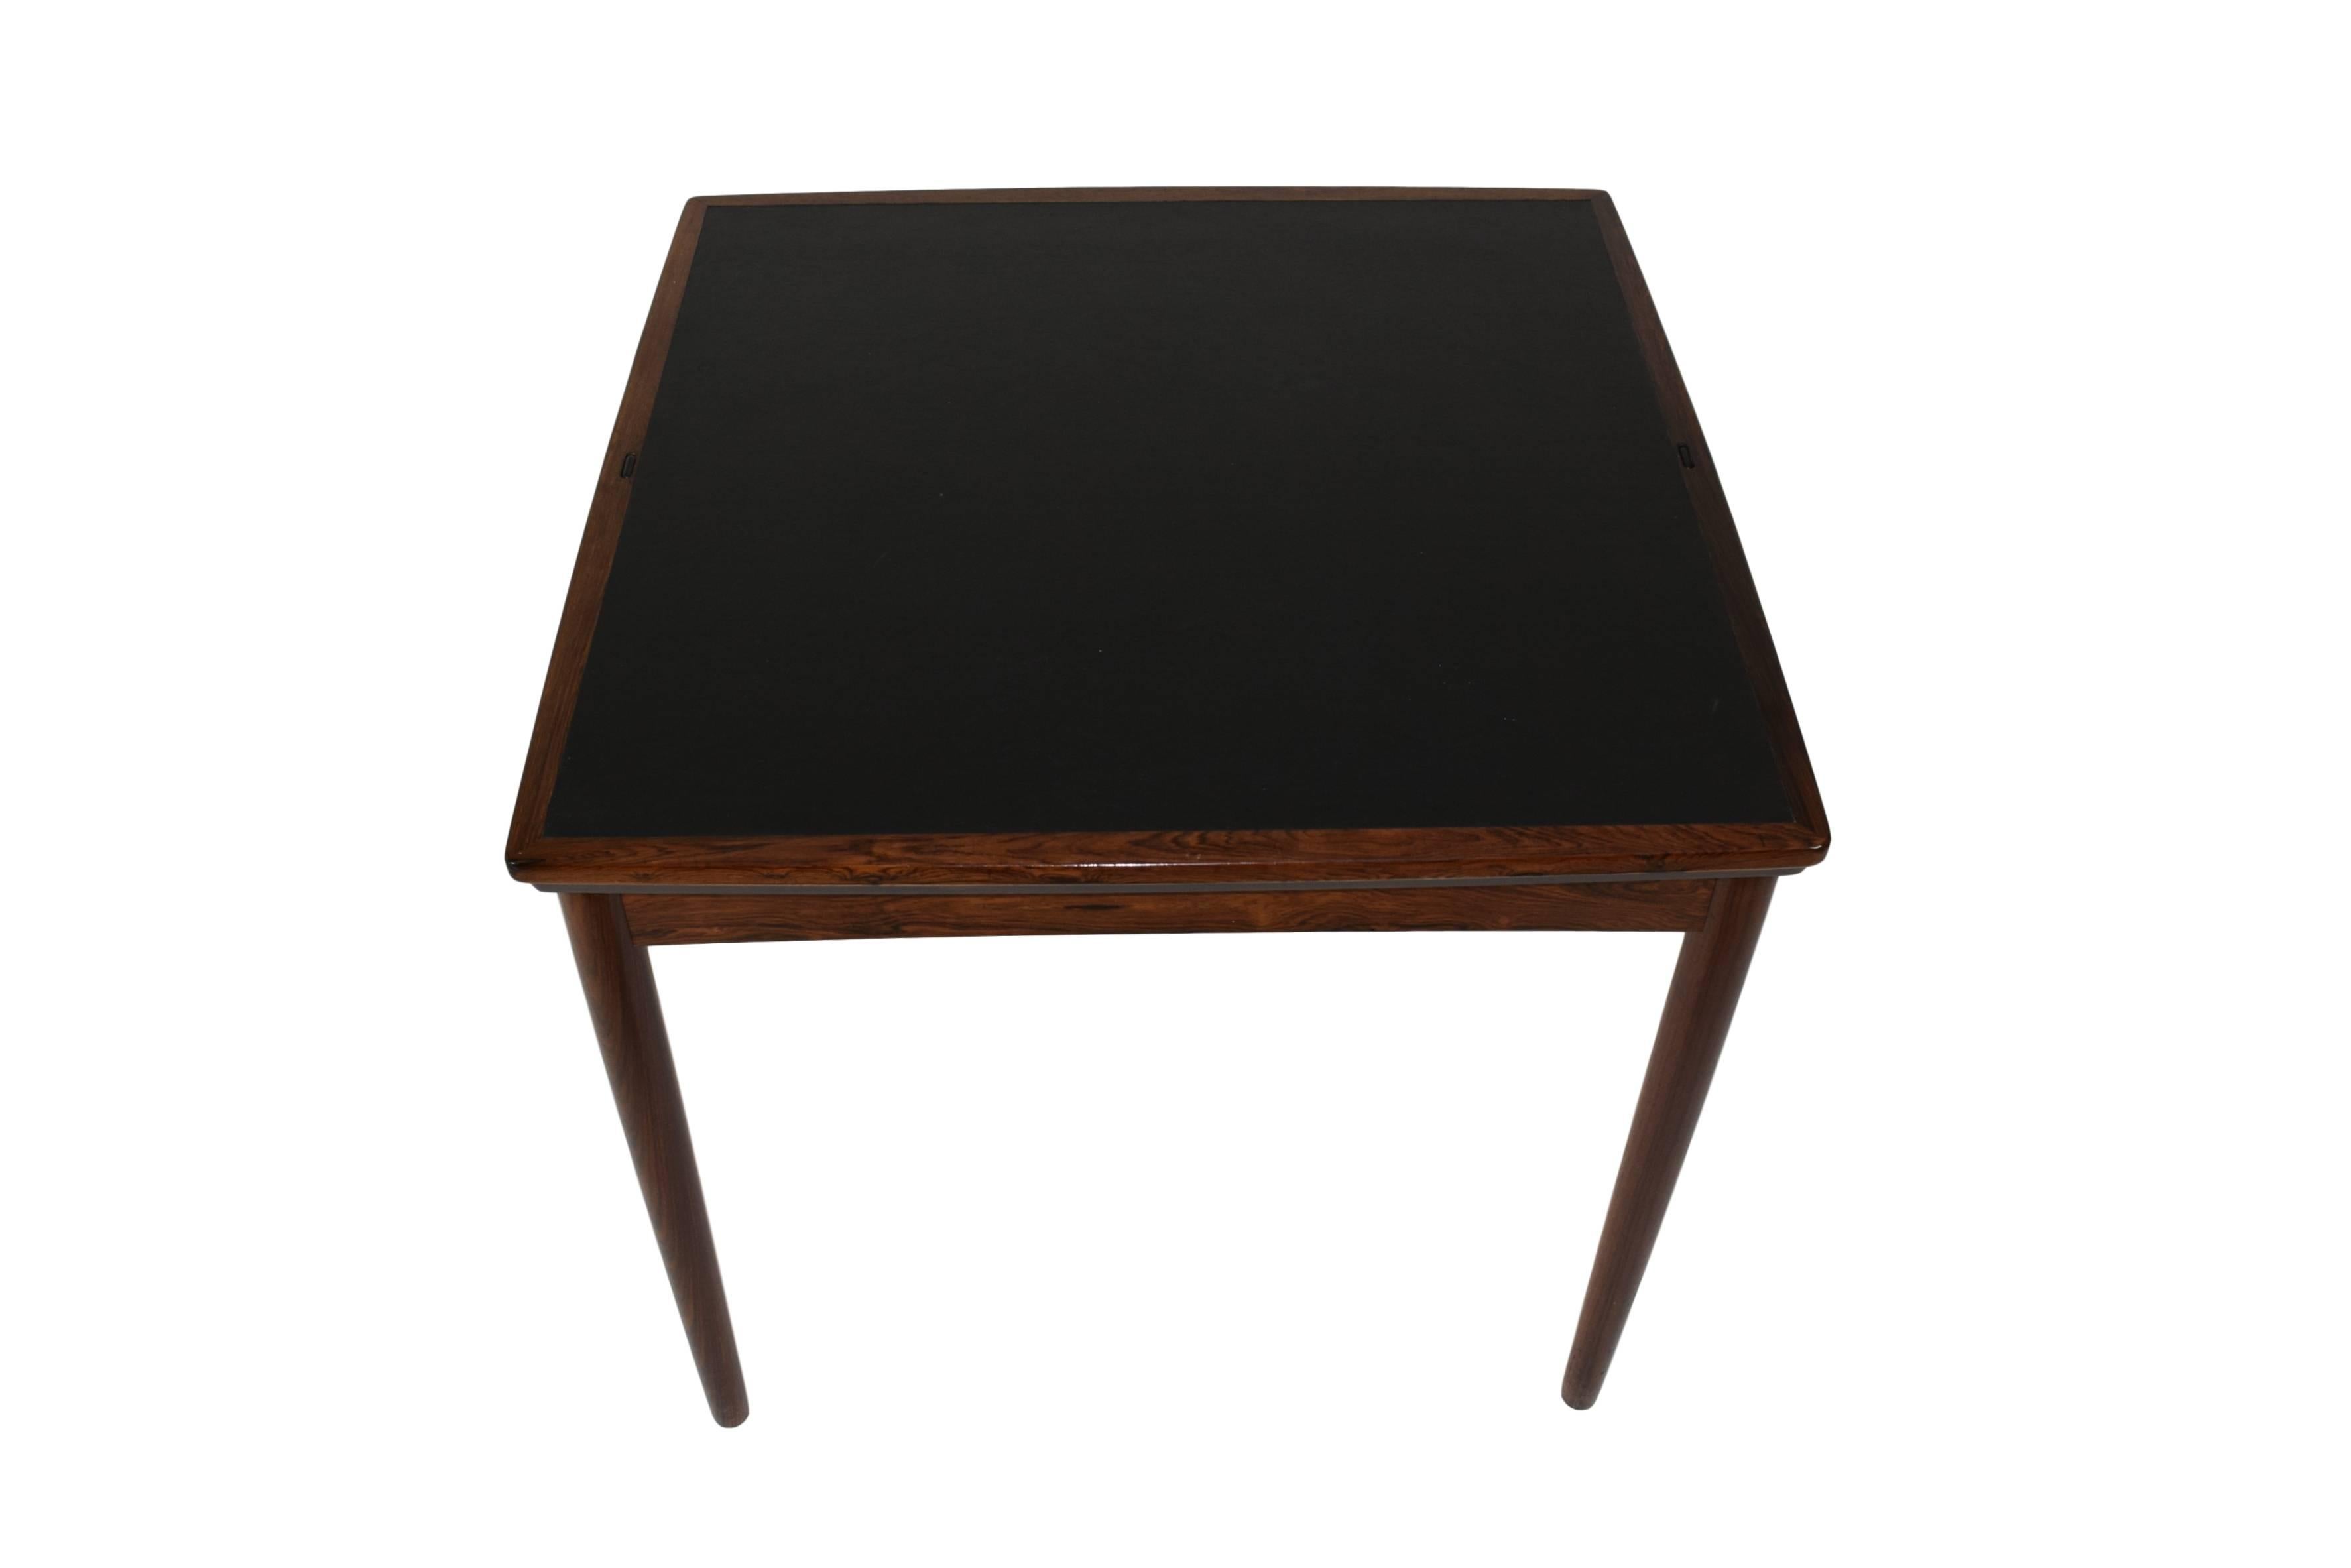 Rosewood Danish Midcentury Games Table / Dining Table by Poul Hundevad, Reversible Top